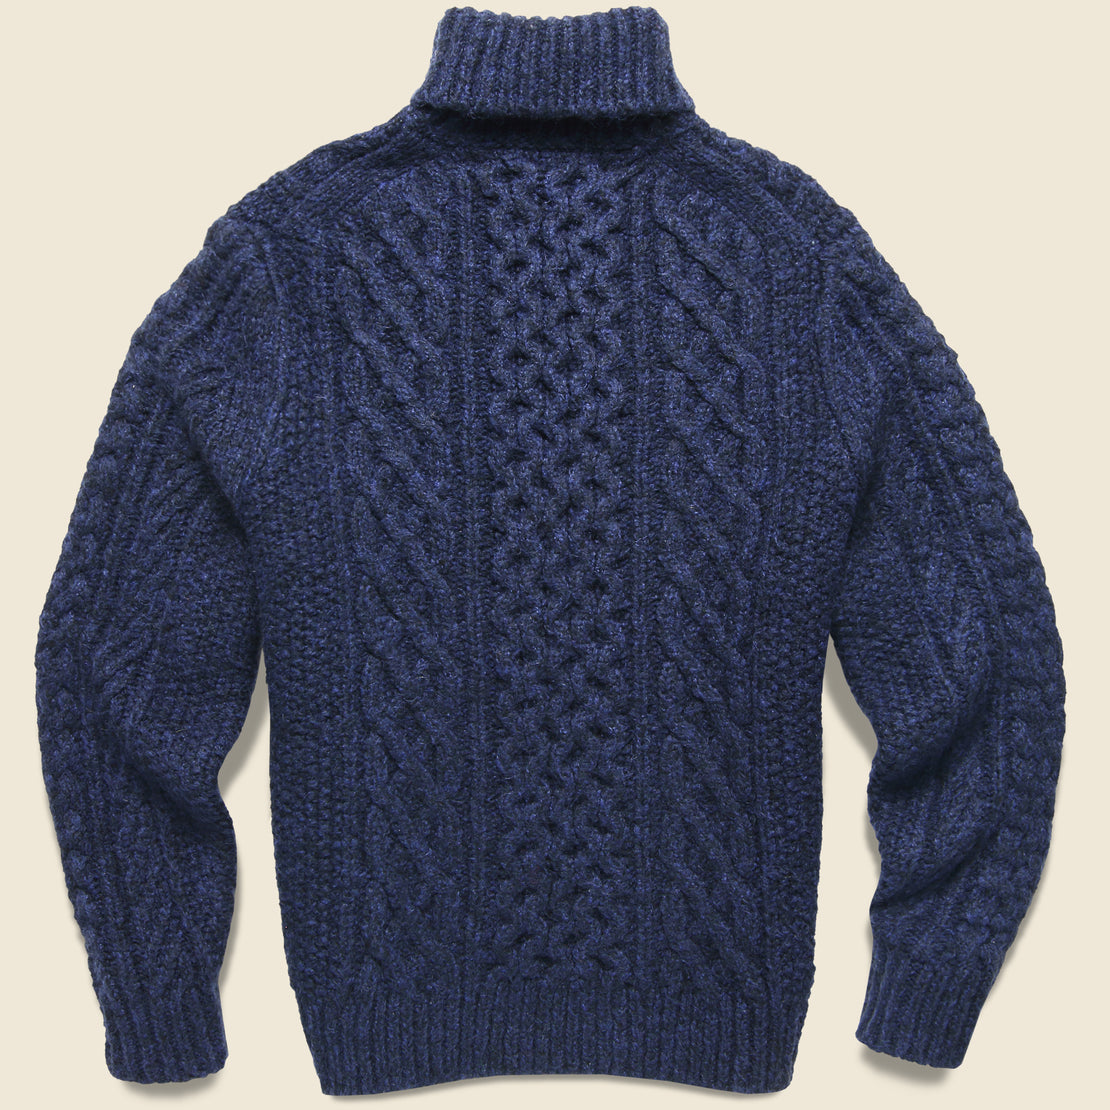 Fisherman Cable Turtleneck - Navy - Alex Mill - STAG Provisions - Tops - Sweater